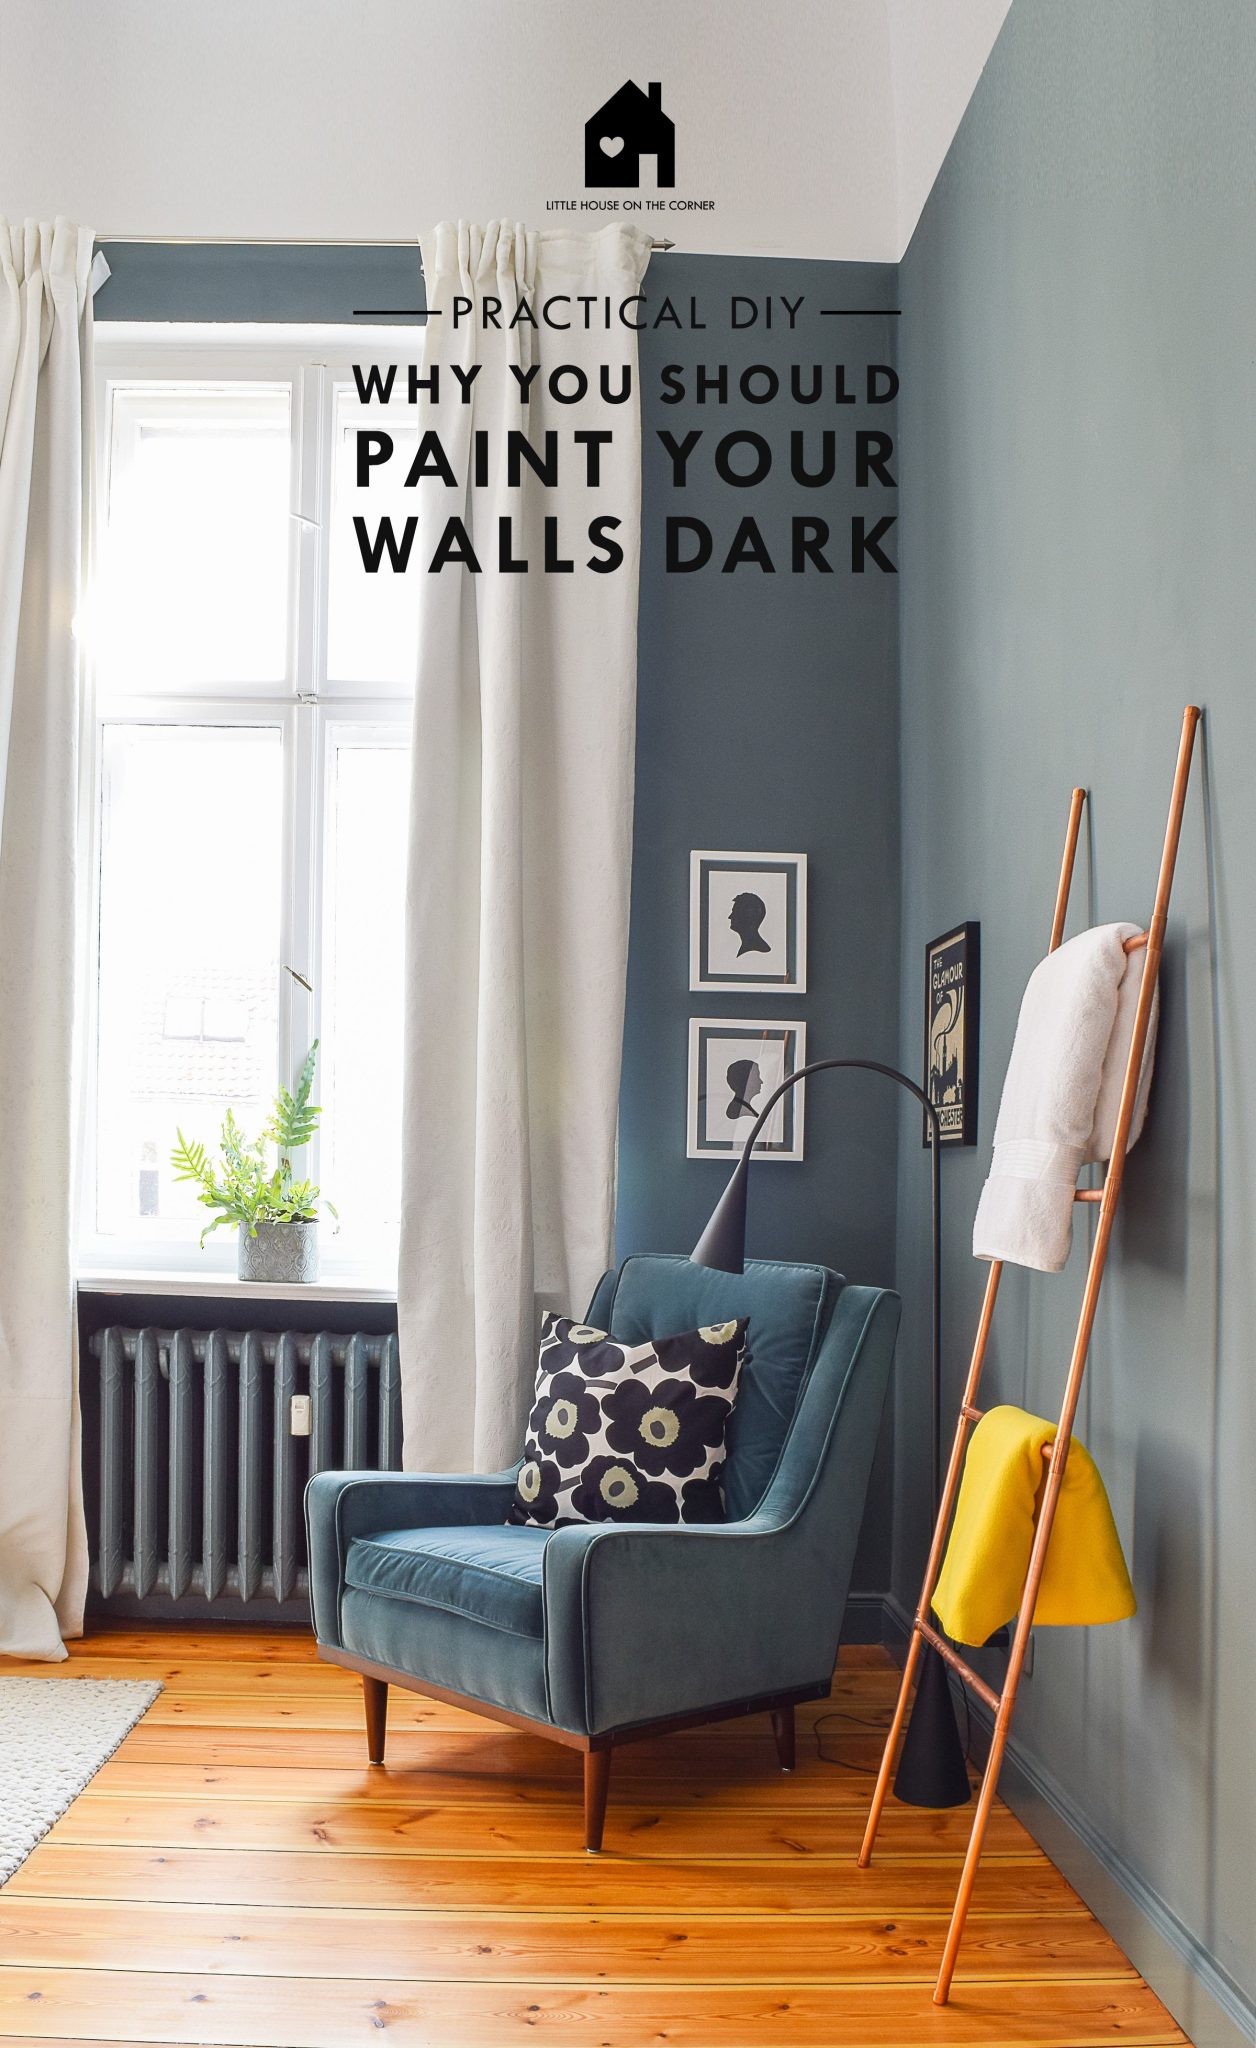 3 Practical Reasons To Paint Your Walls Dark - Little House On The Corner